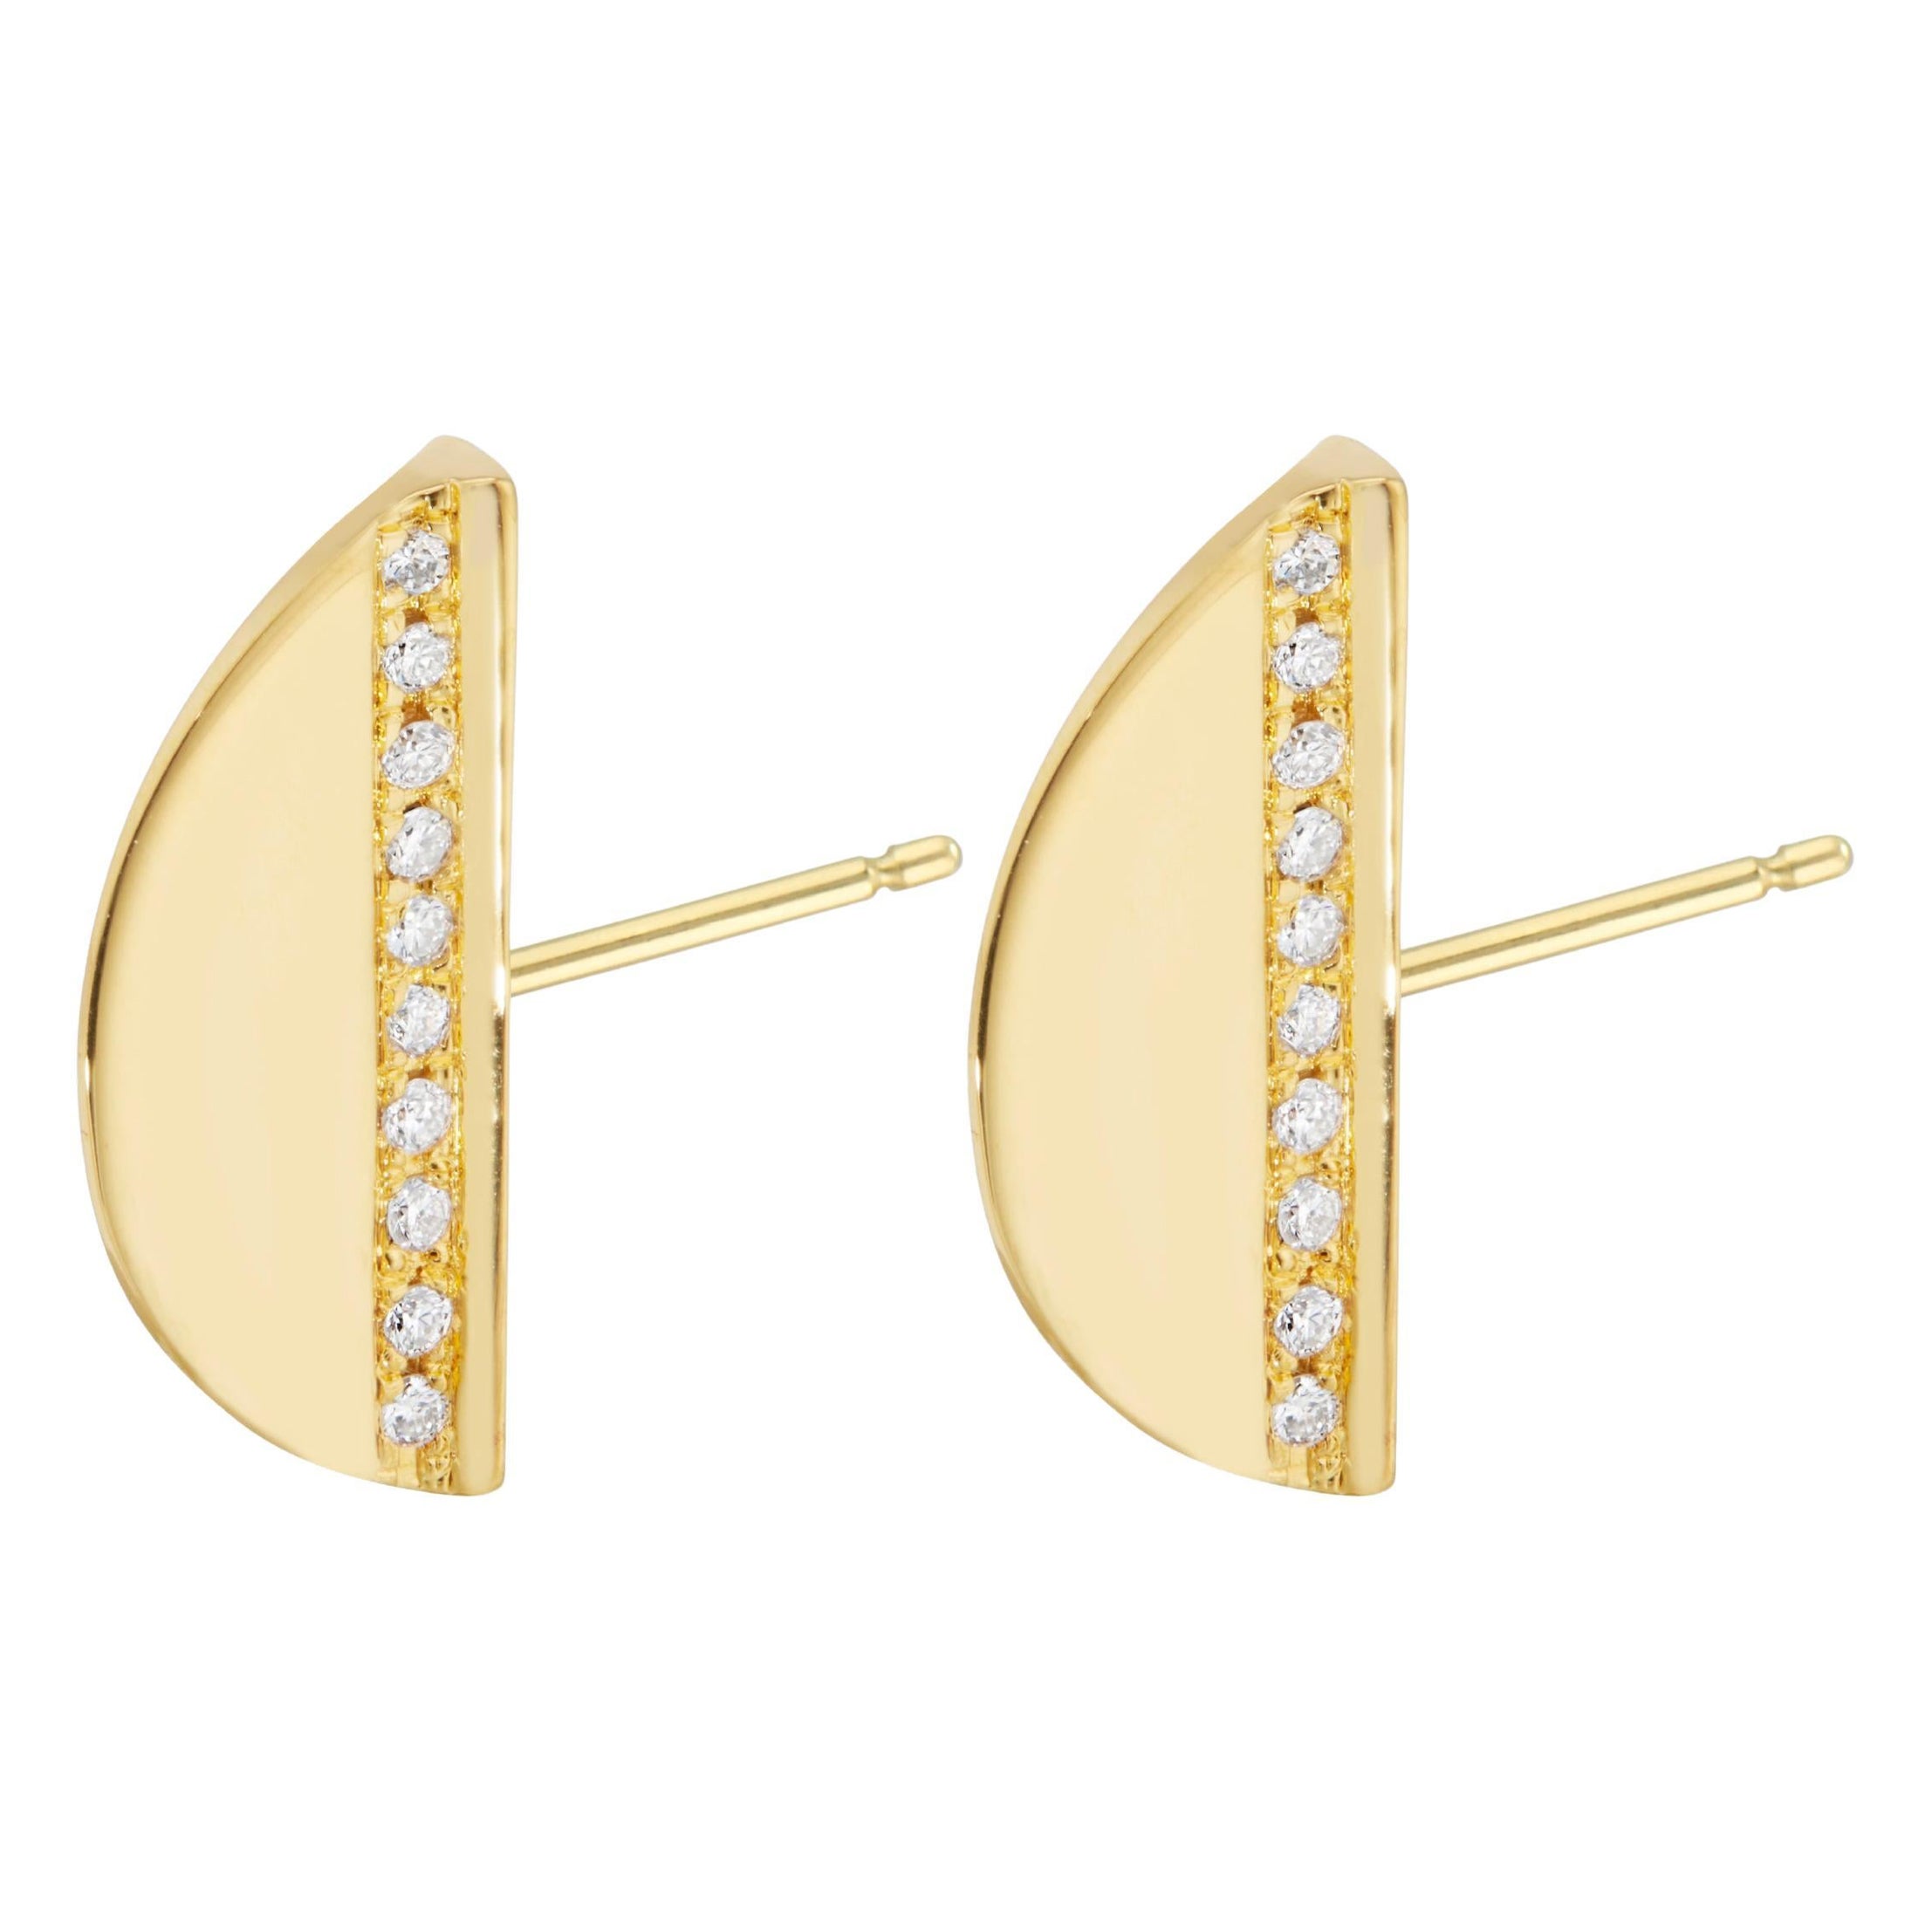 22K GV Half Crescent Earrings with Natural Diamonds by Chee Lee New York For Sale